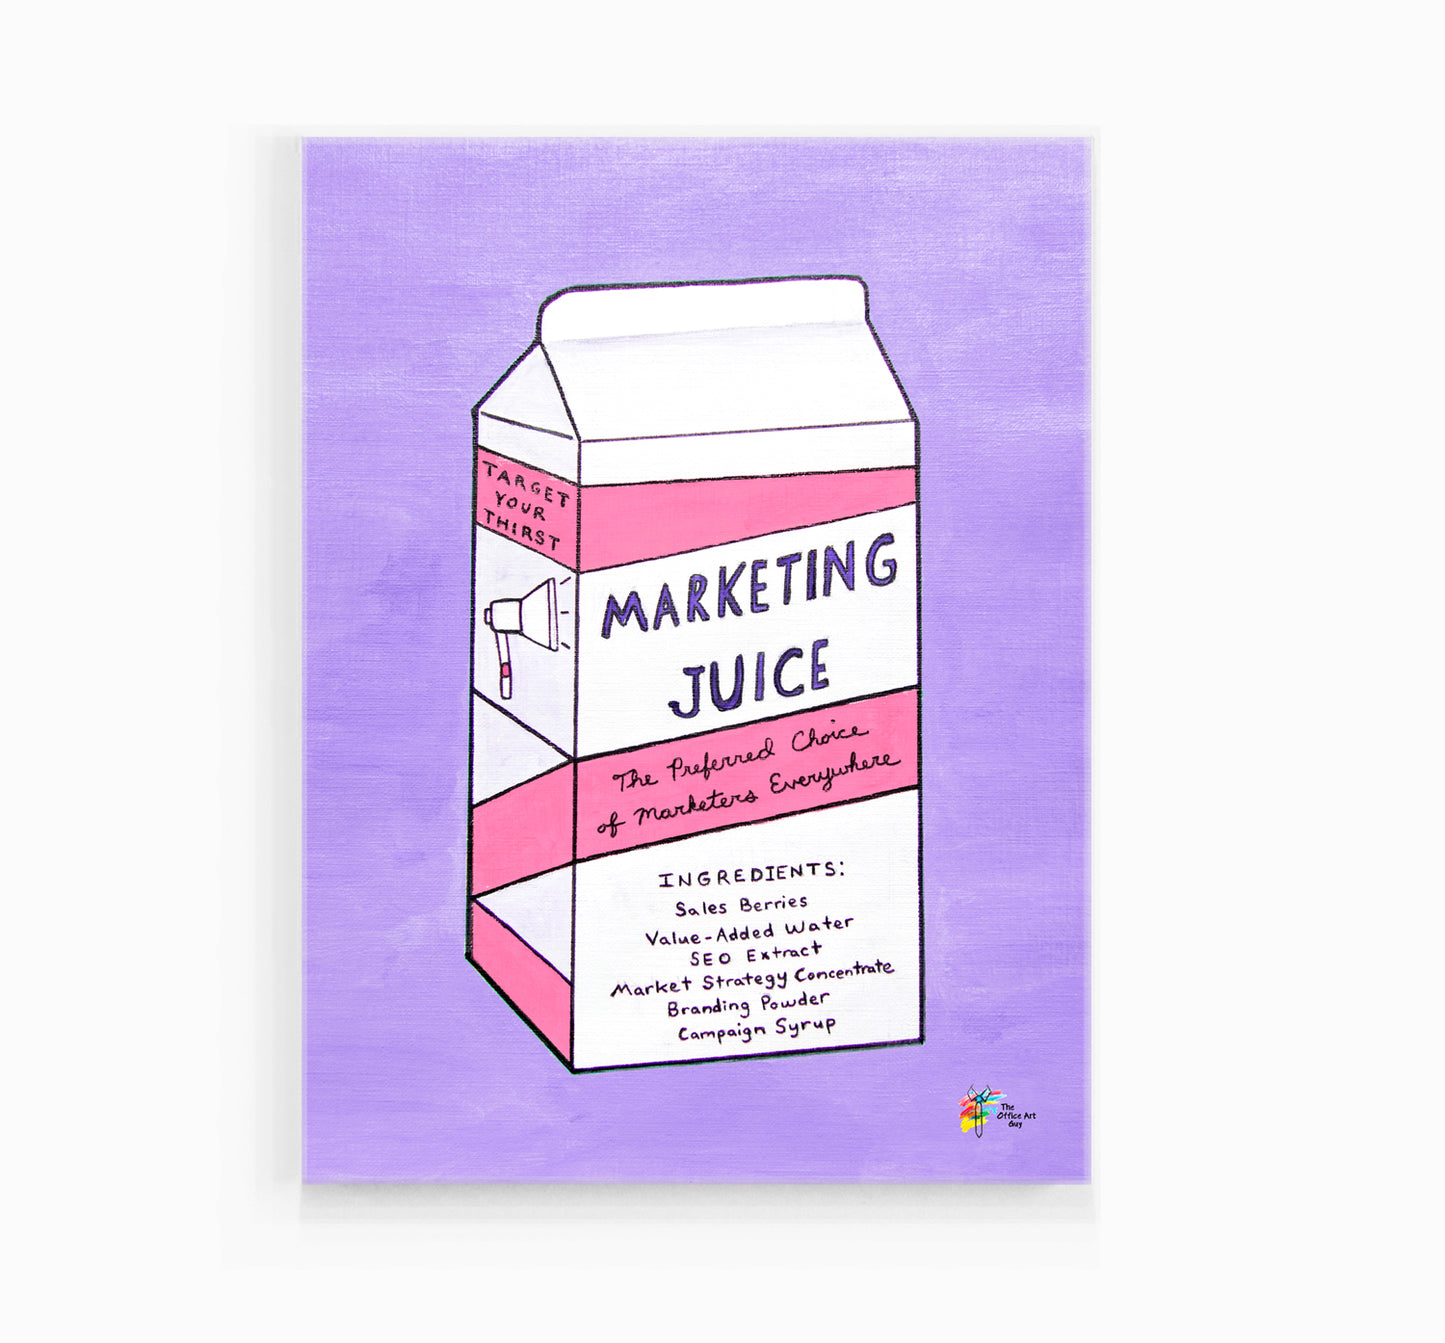 Marketing Juice Canvas Wall Art by The Office Art Guy